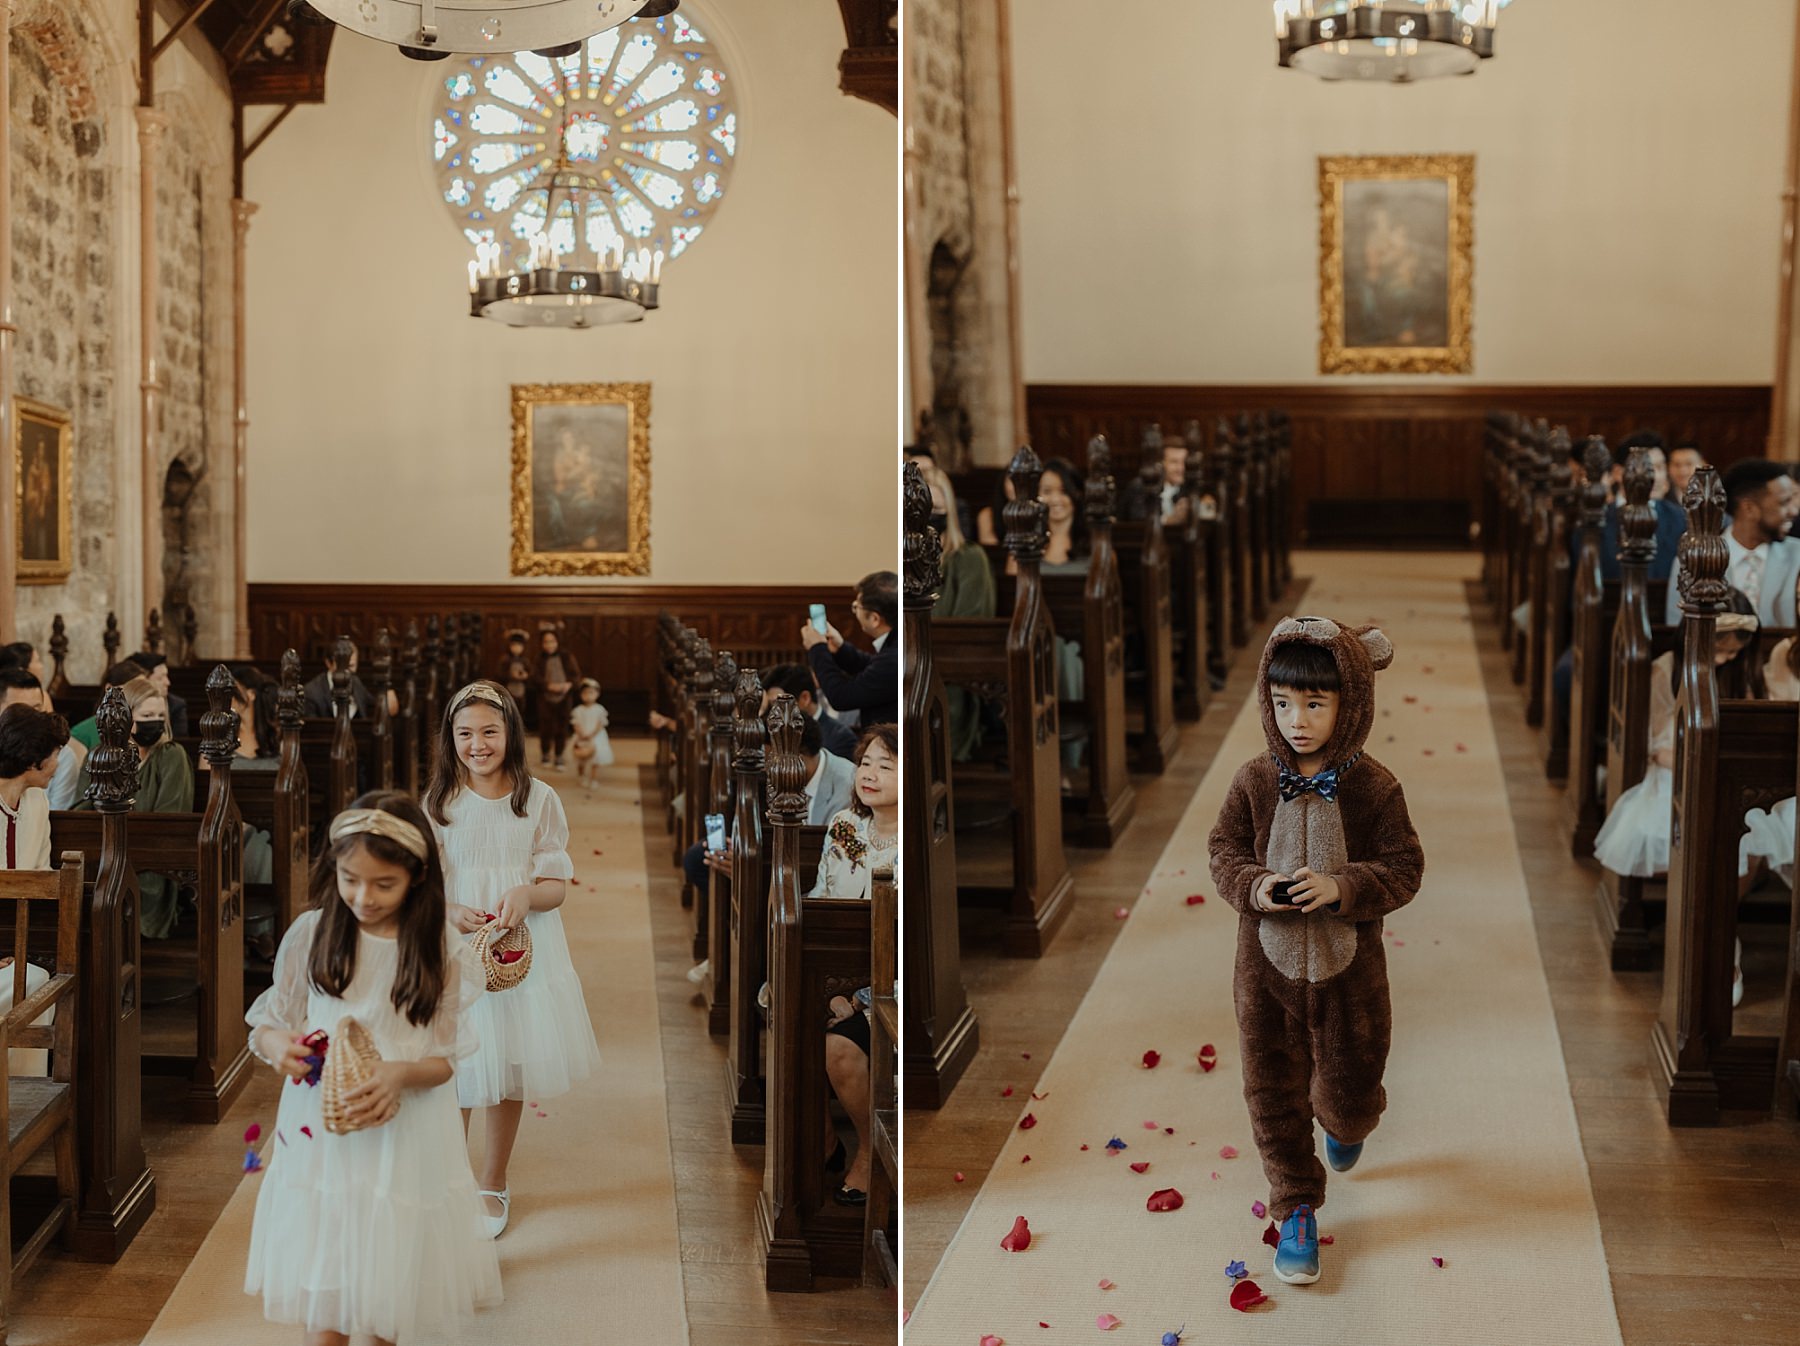 kid dressed up as a bear walking down the aisle at wedding as a ring bearer at cluny castle wedding scotland